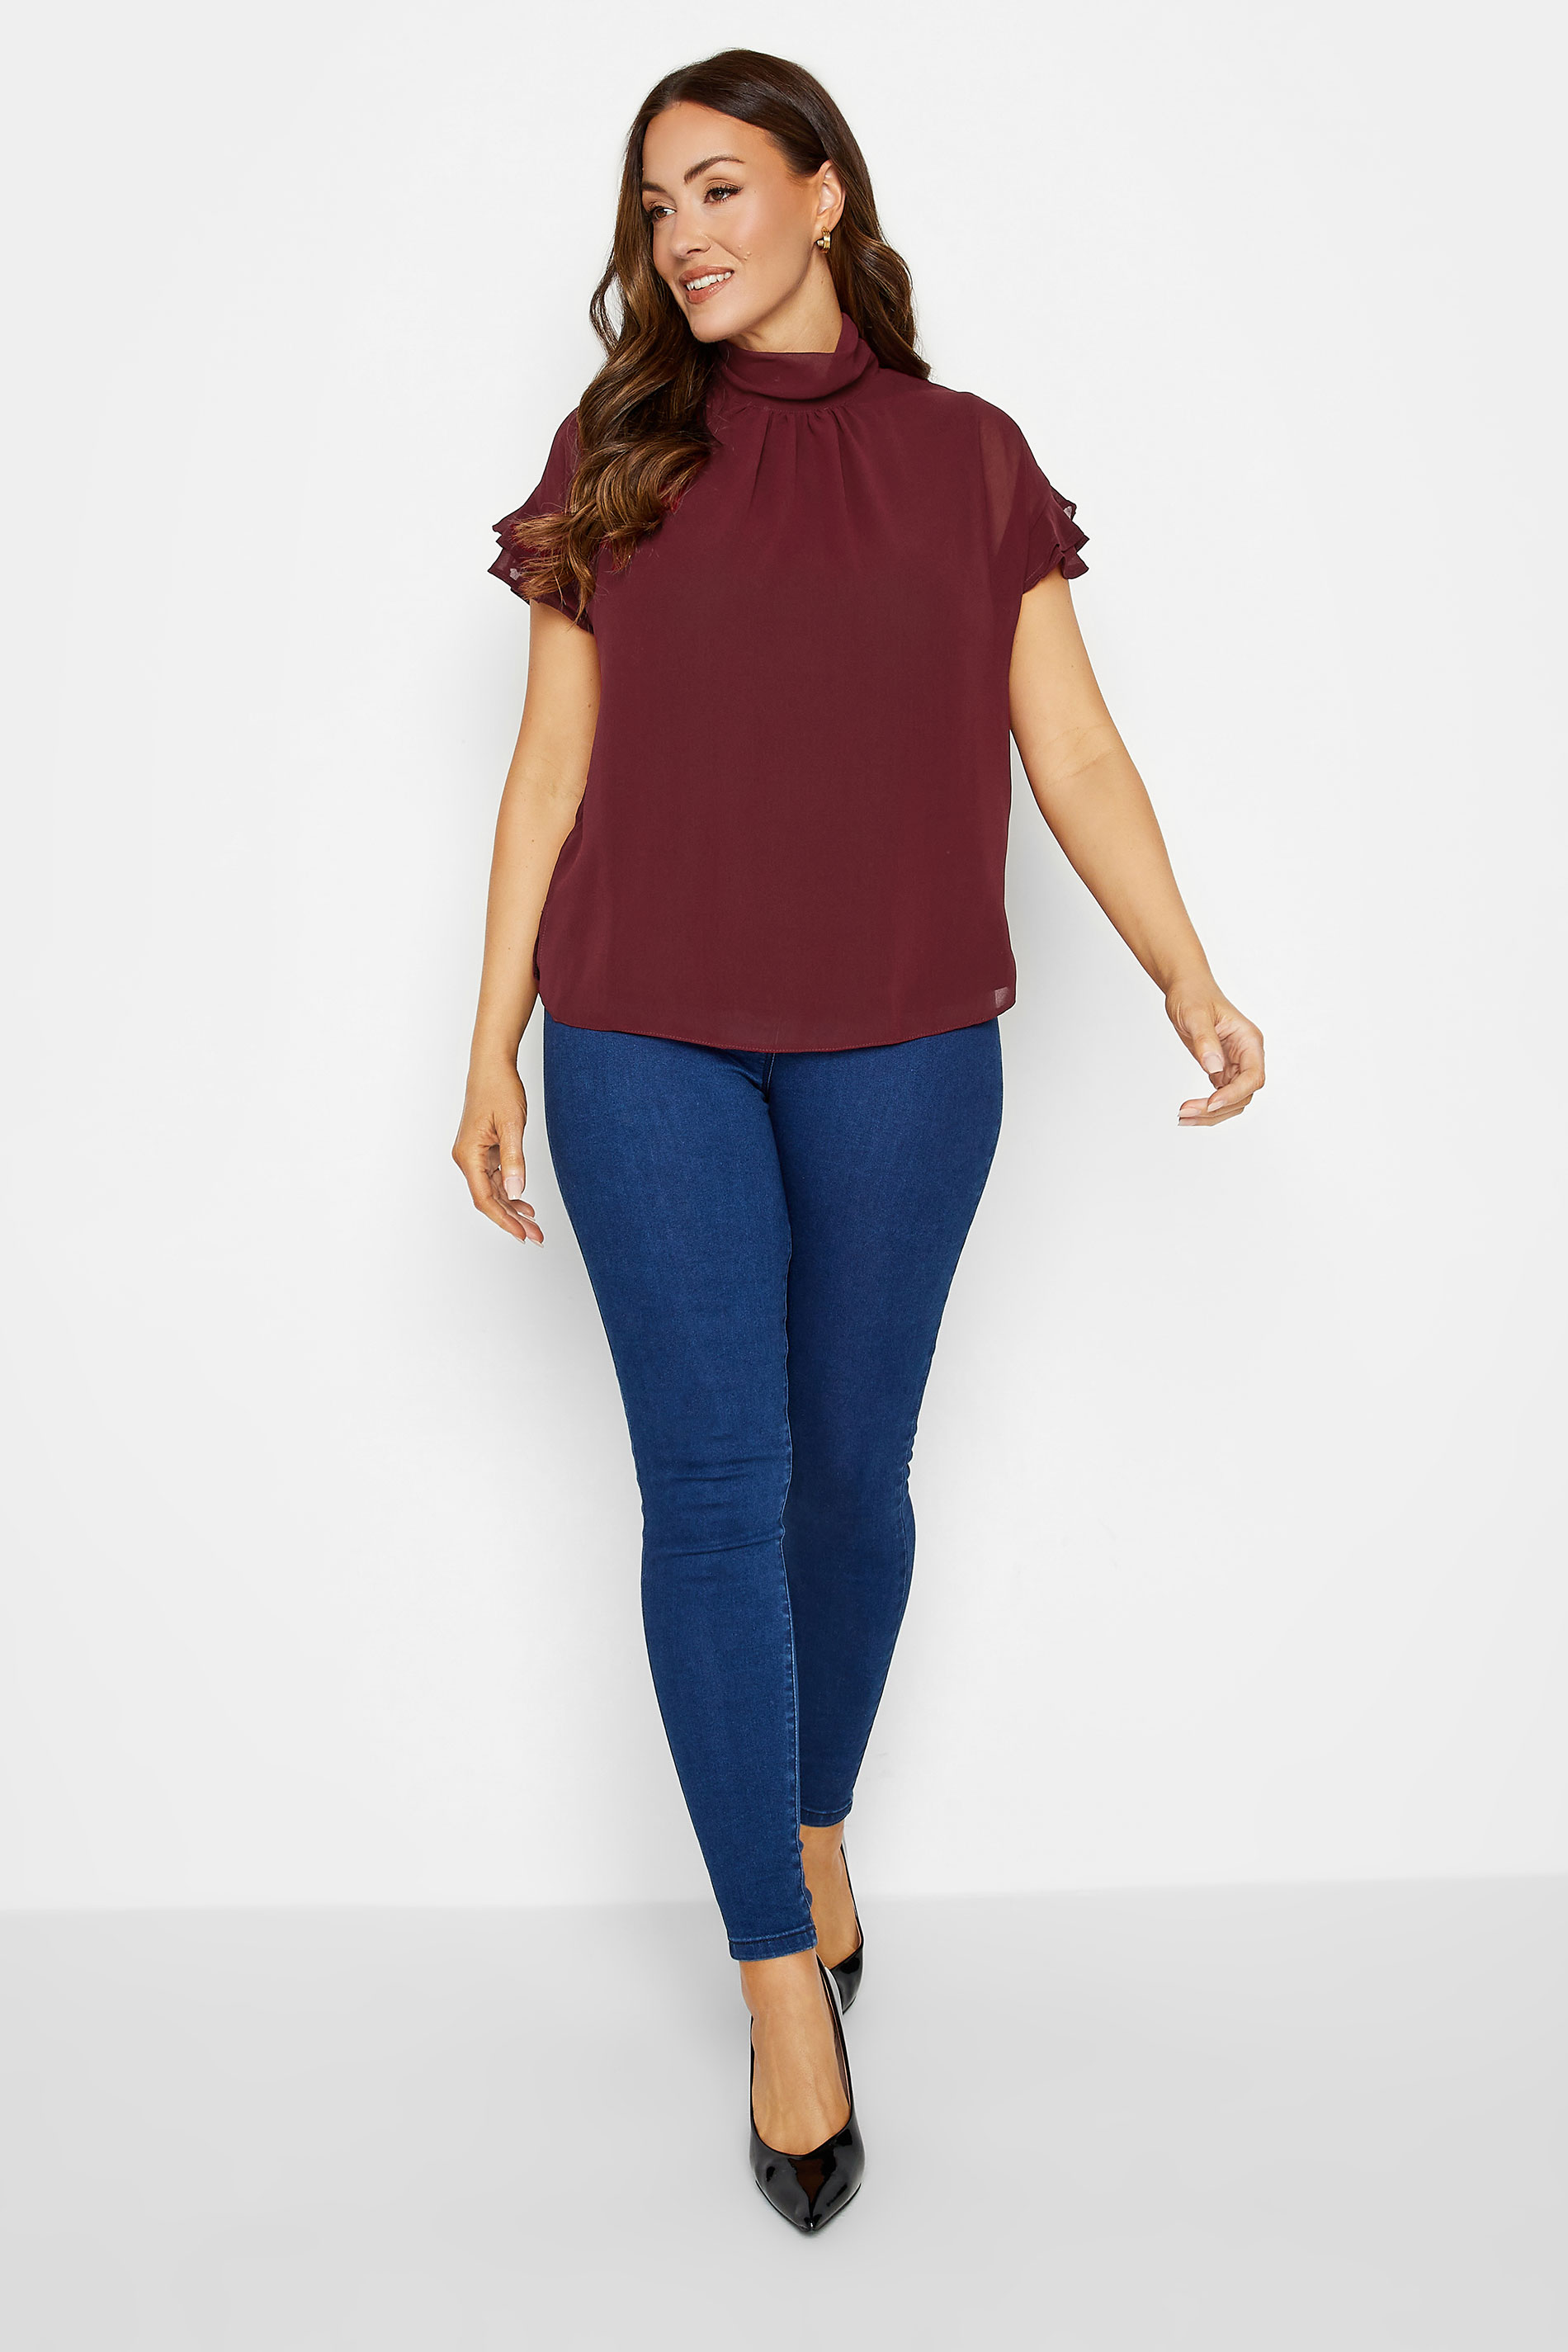 M&Co Burgundy Red High Neck Frill Sleeve Blouse | M&Co 2